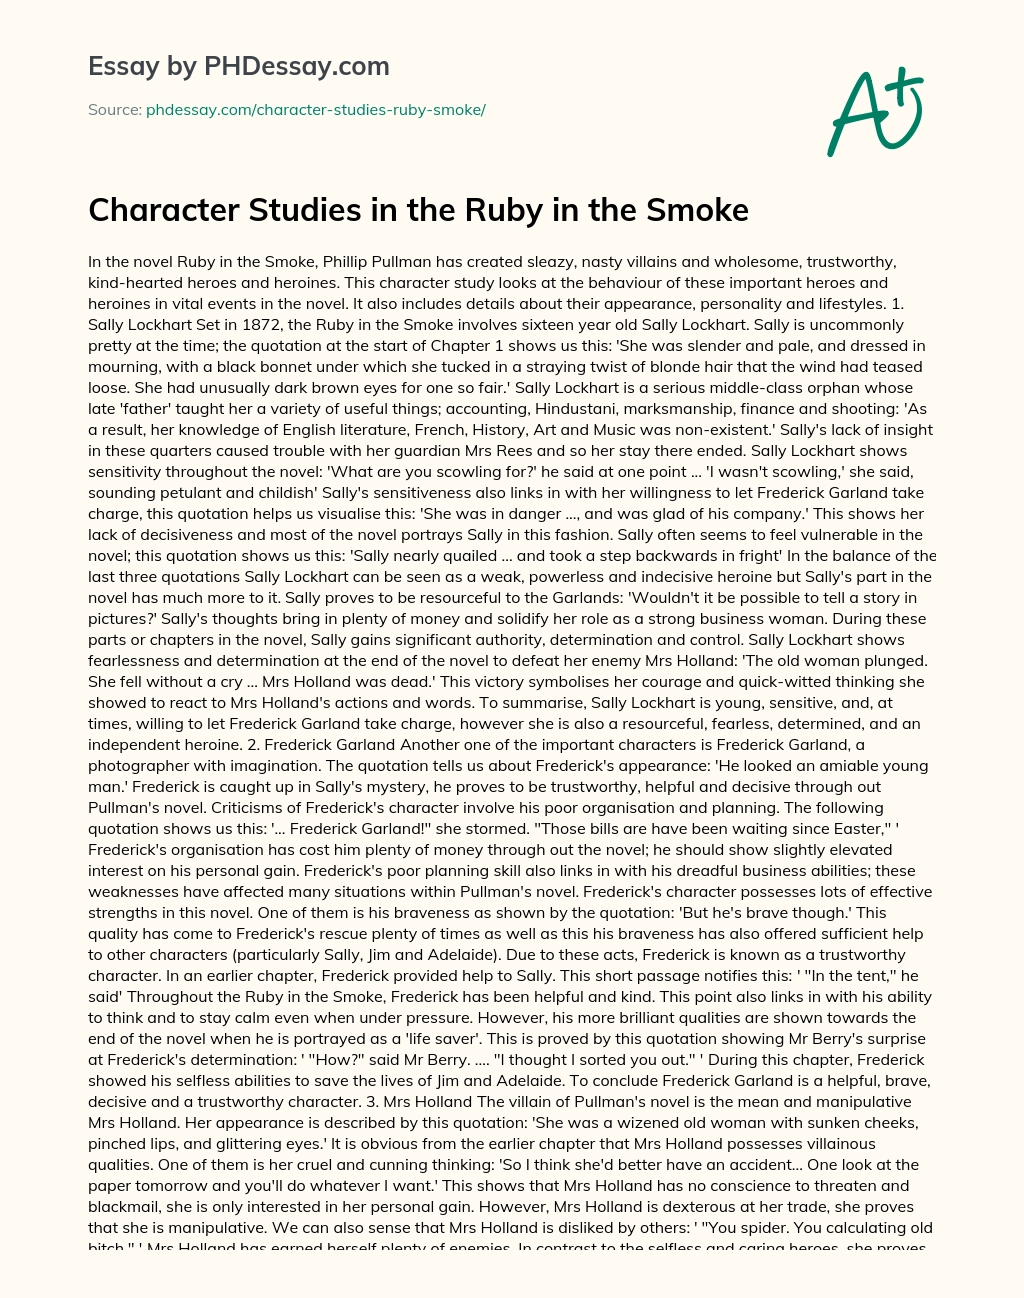 Character Studies in the Ruby in the Smoke essay